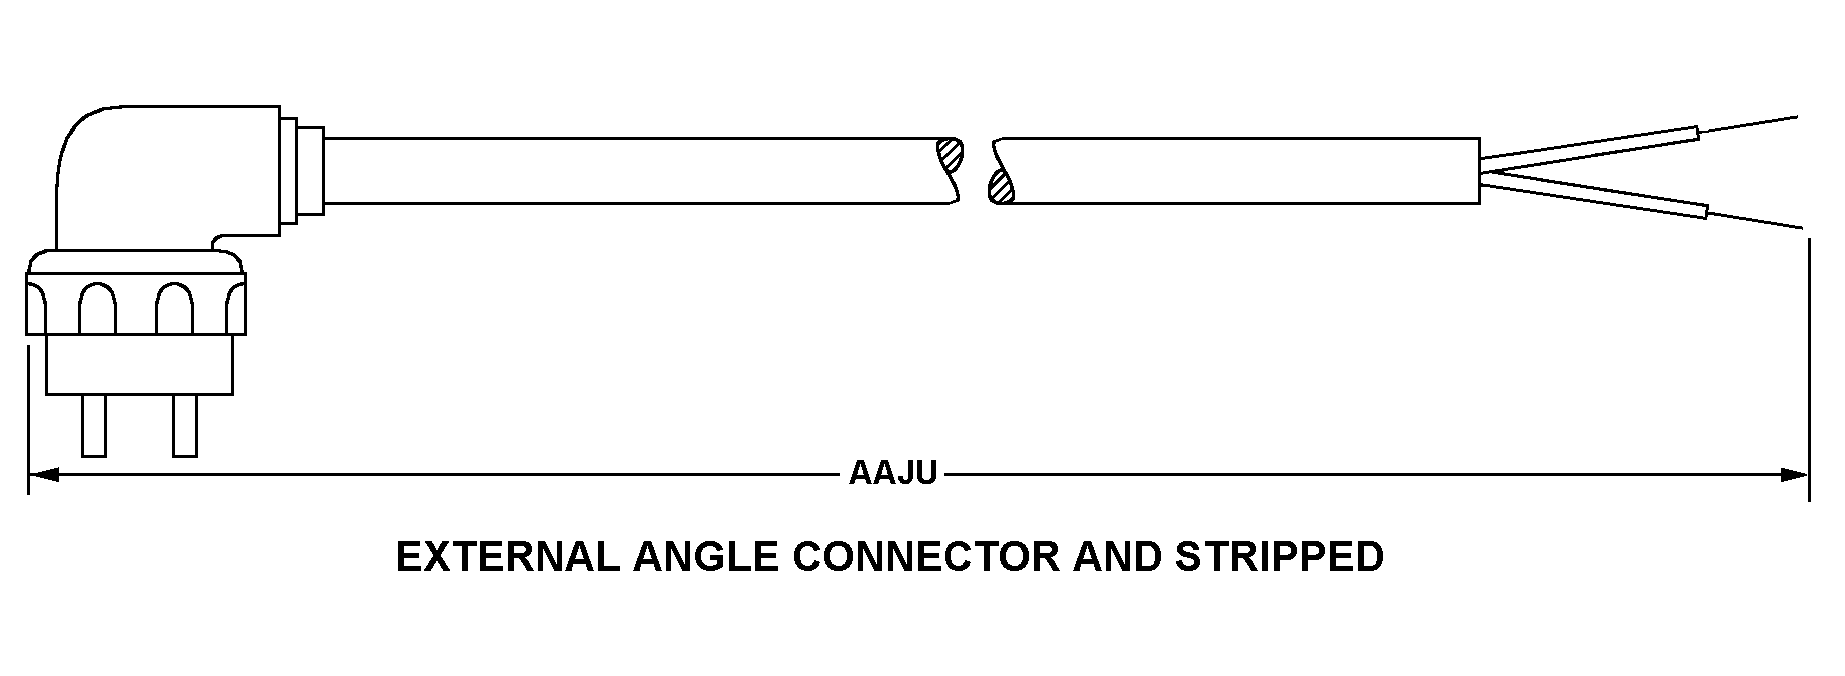 EXTERNAL ANGLE CONNECTOR AND STRIPPED style nsn 6150-01-522-0436